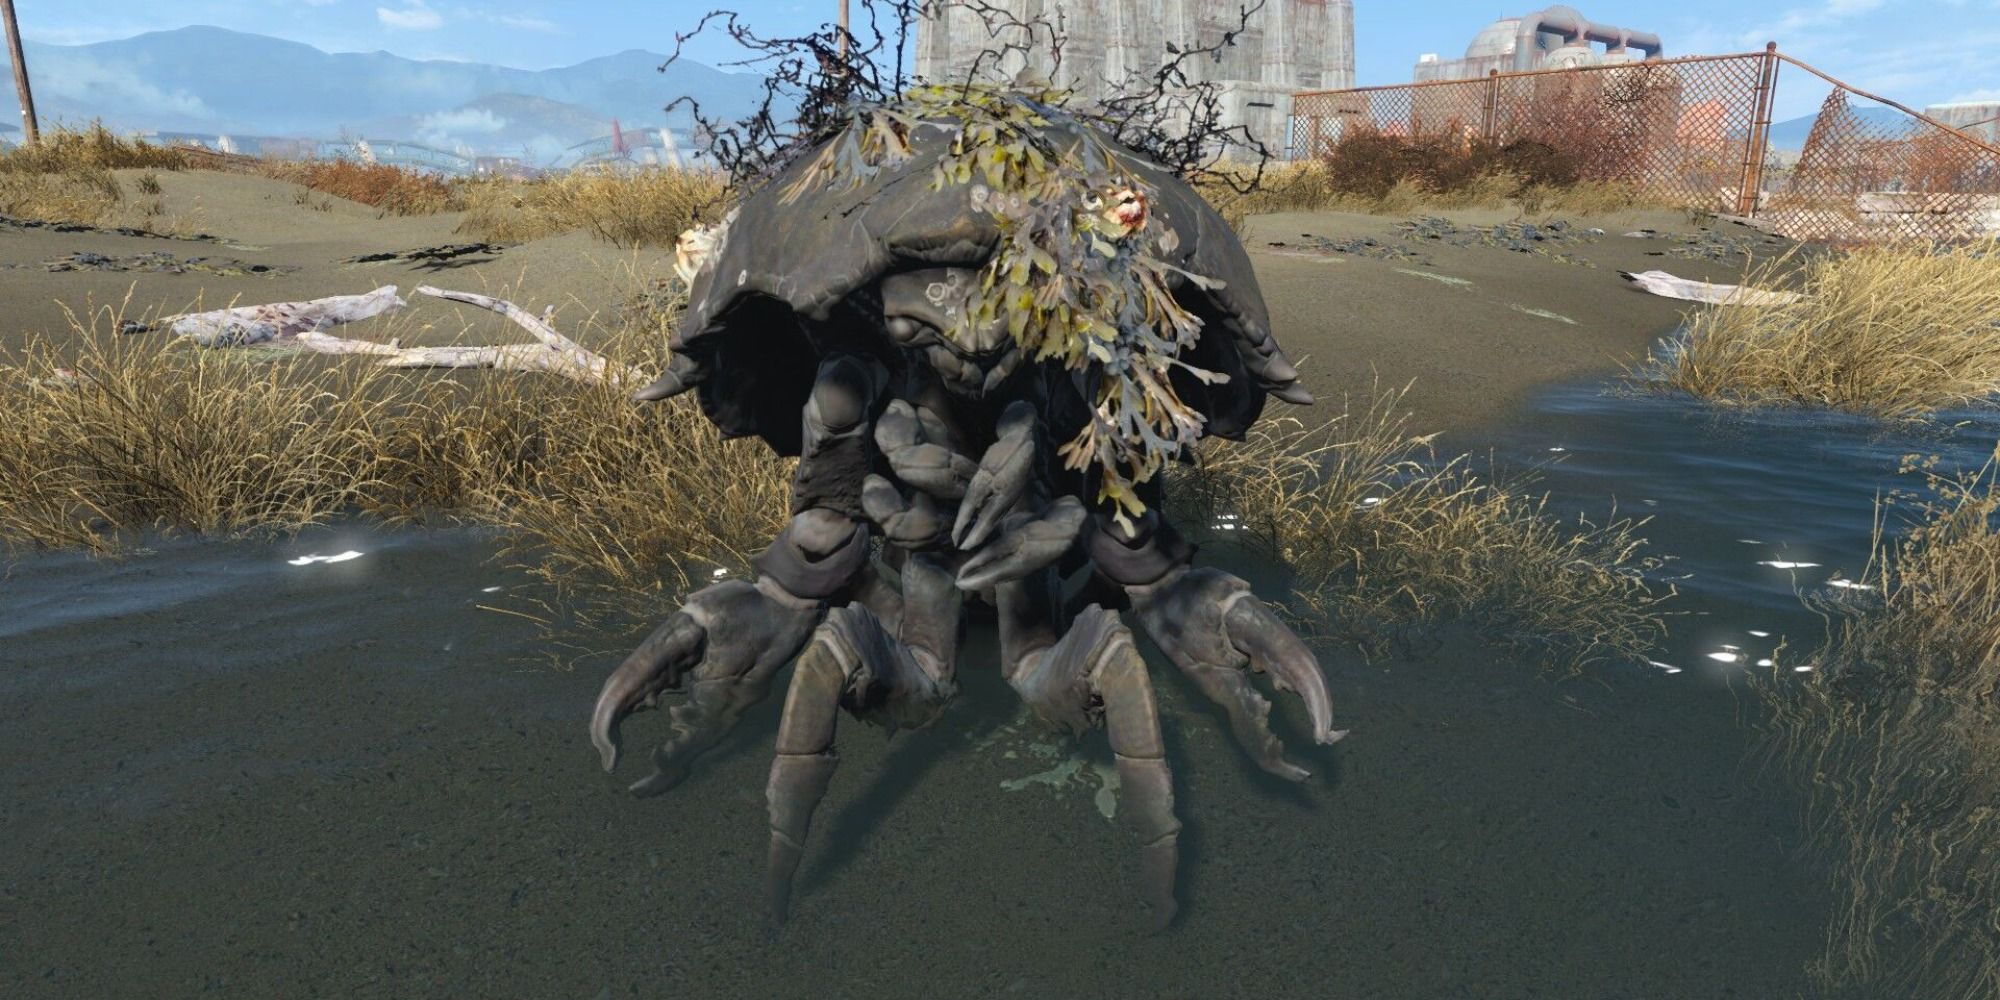 Mirelurk with overgrowth on head in water and staring at camera